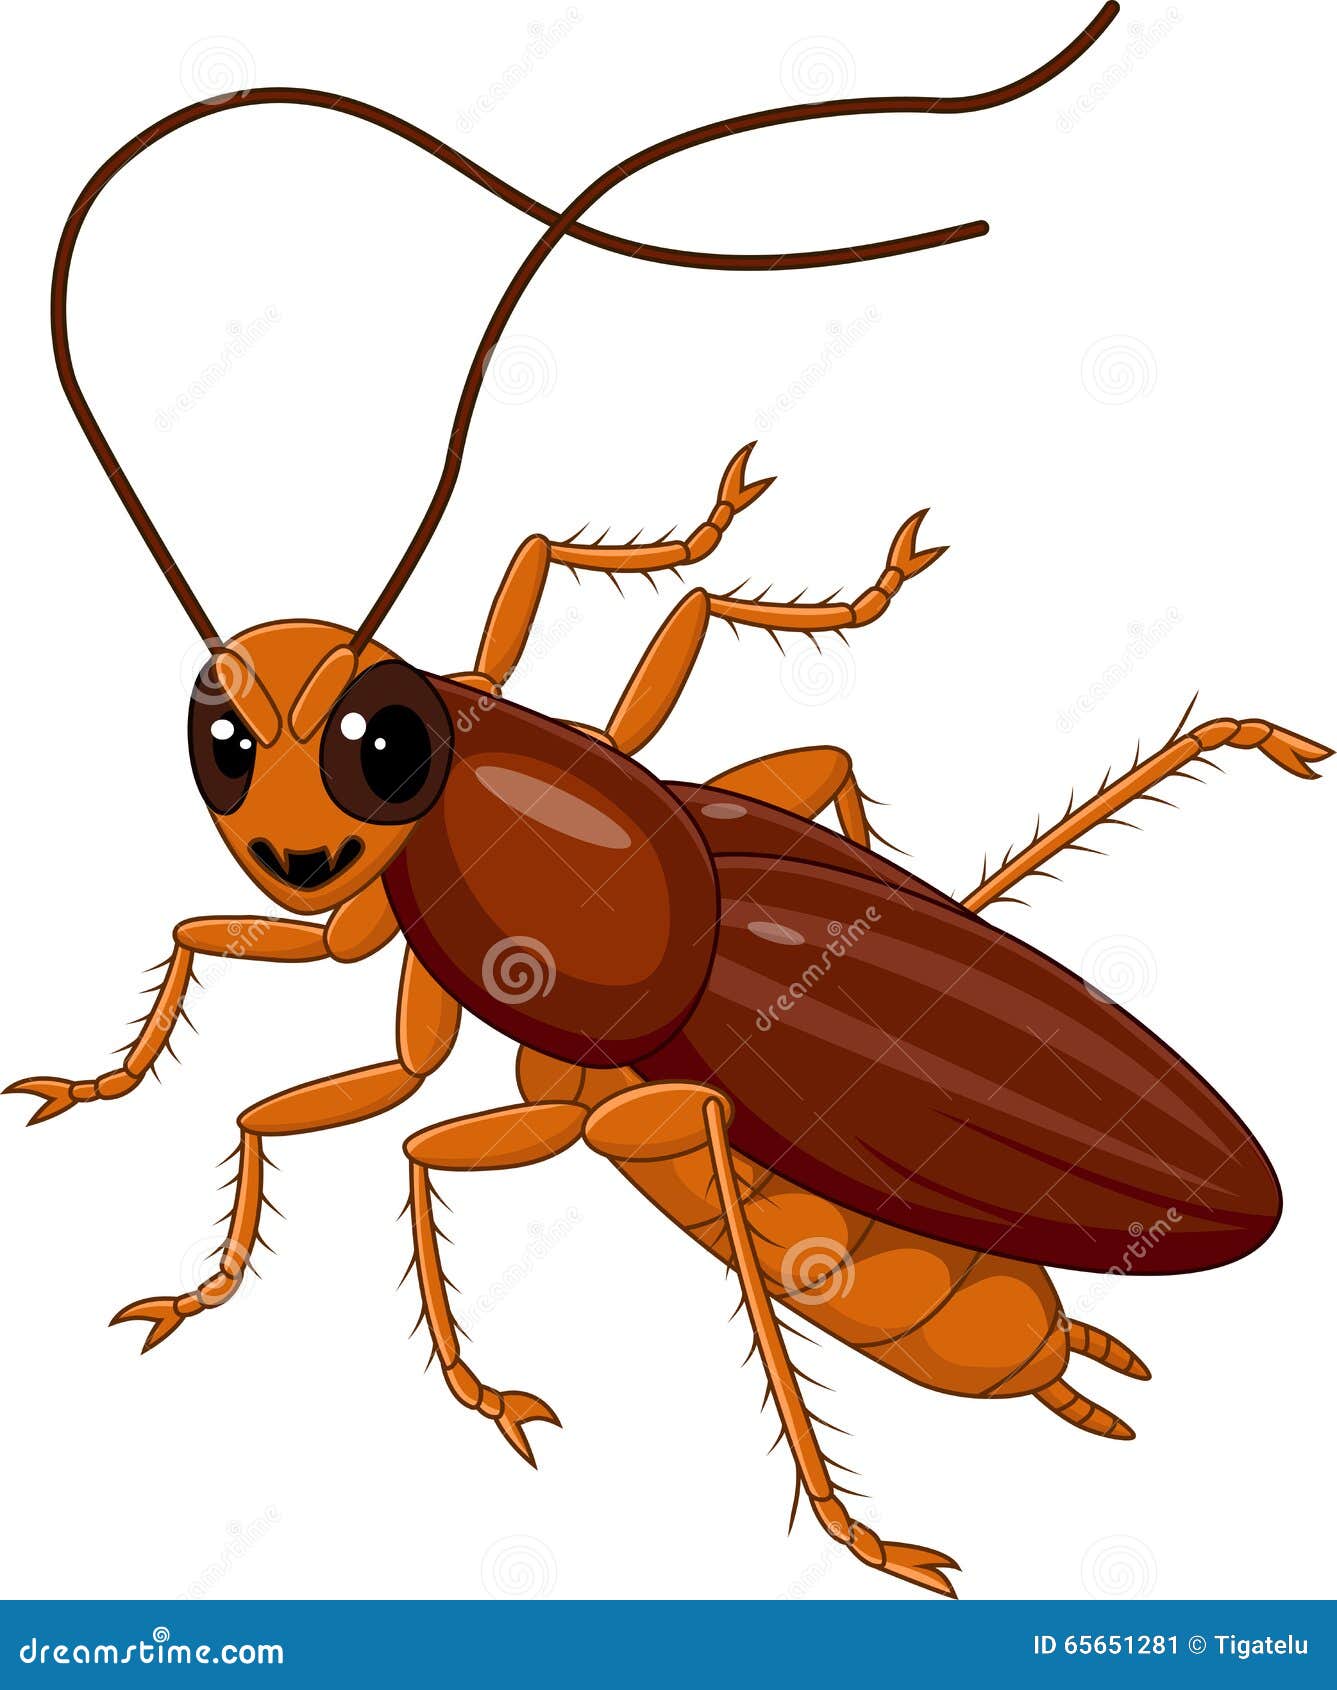 Cute Cockroach Isolated on White Background Stock Vector - Illustration ...